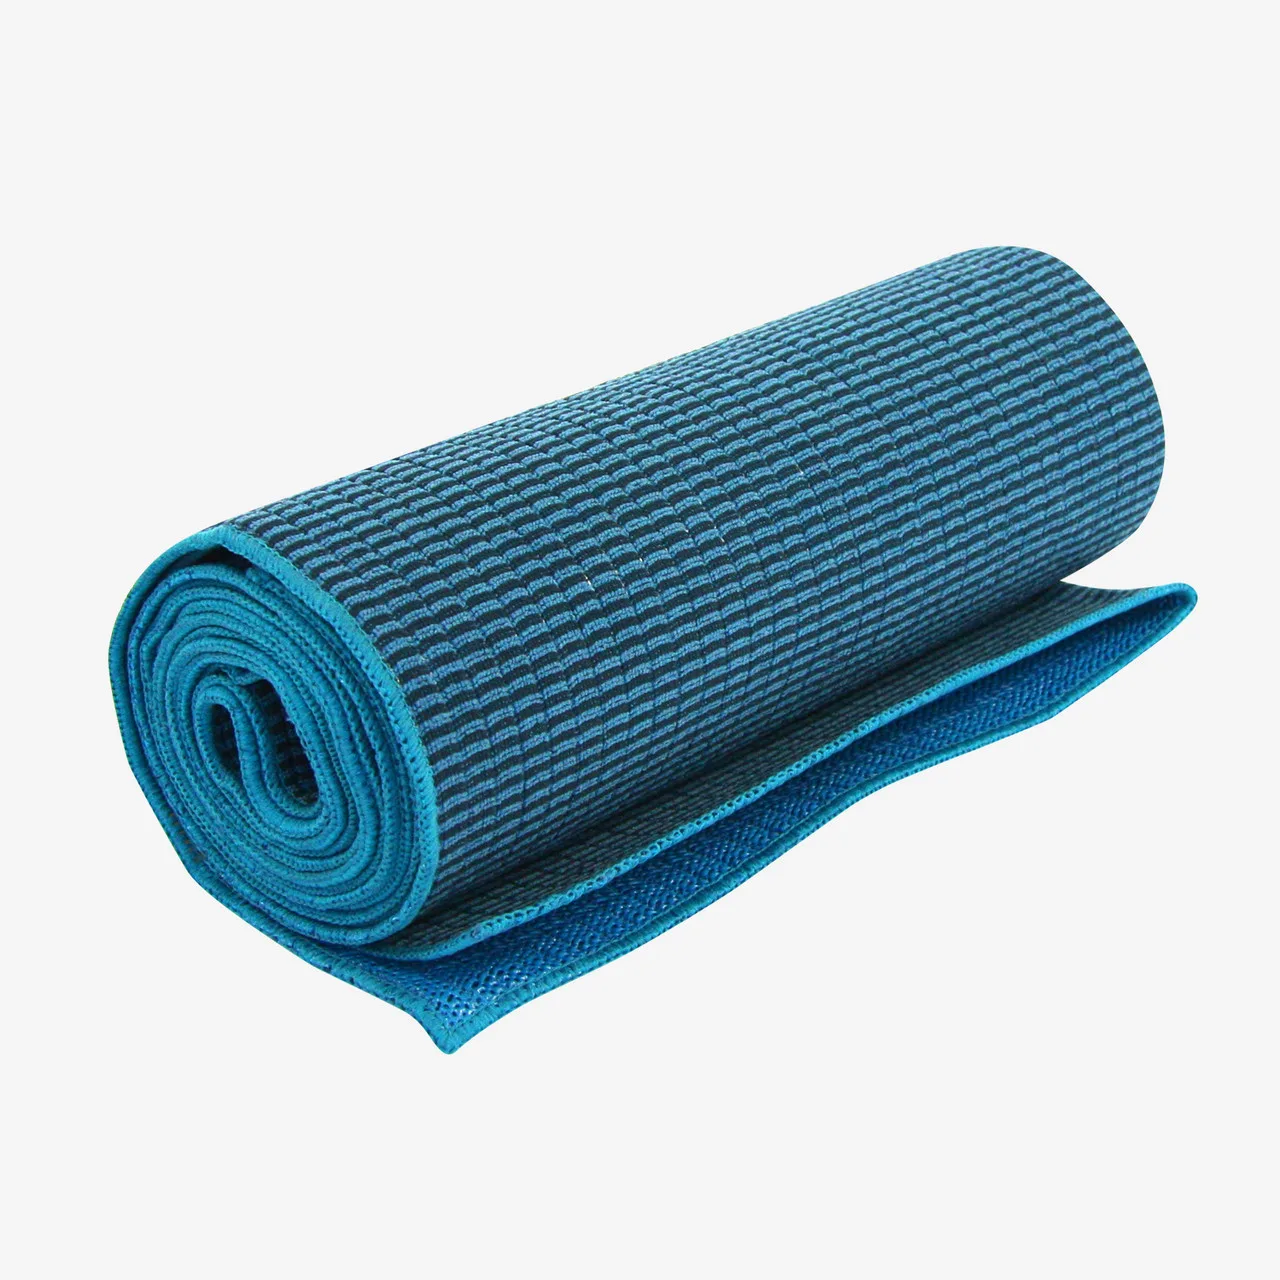 Hand-Woven Cotton Yoga Mat Carrier from Thailand - Hot Yoga